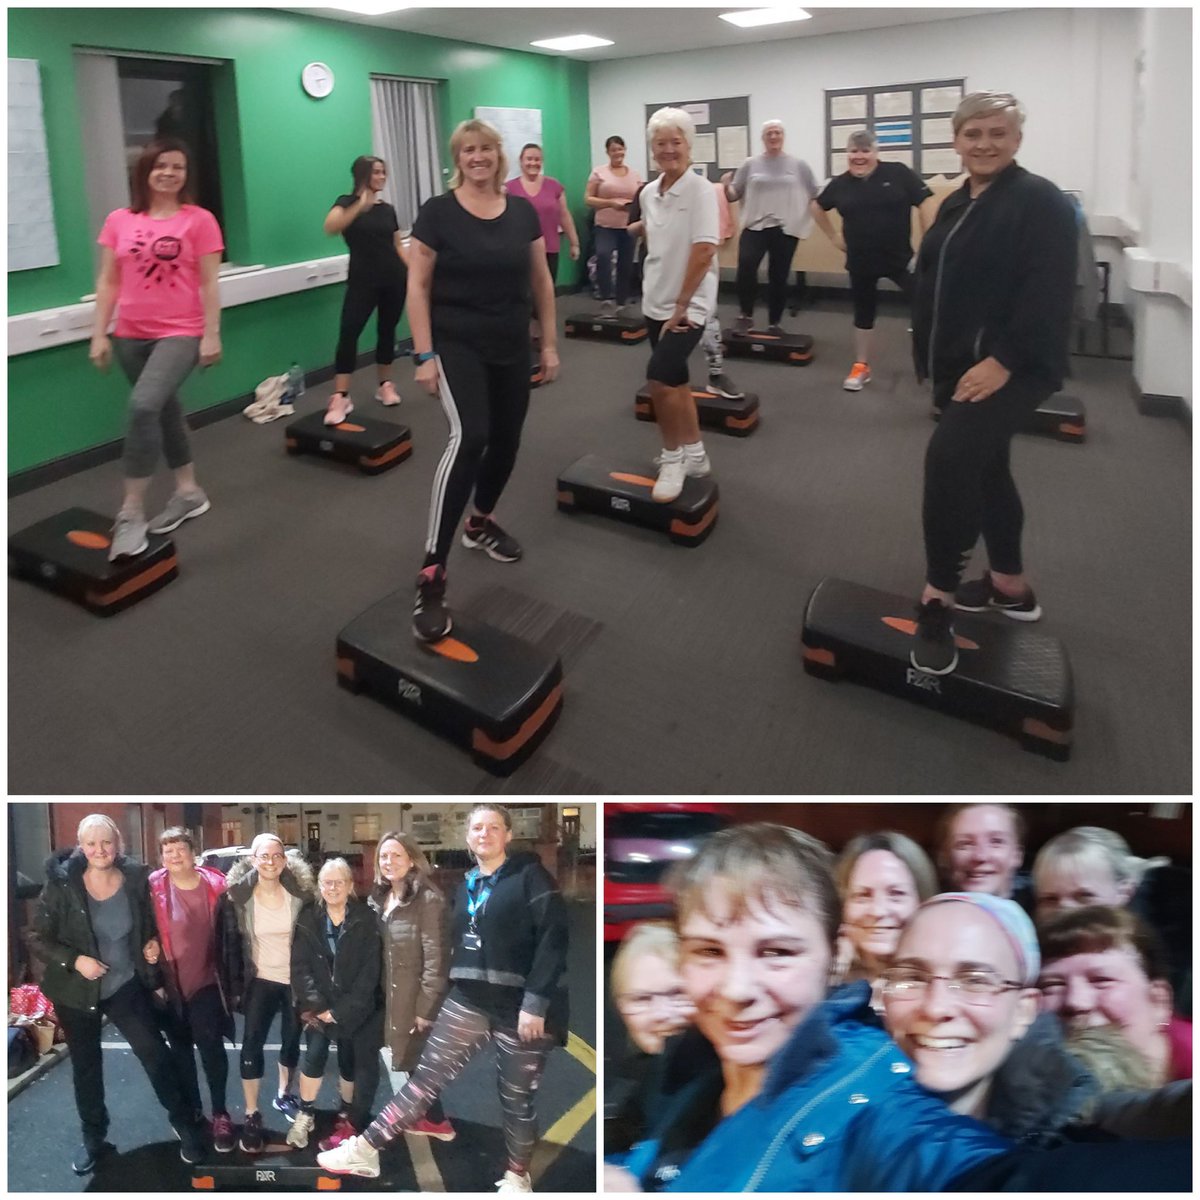 2 STEP HIIT classes at Bentley House for Bolton community staff, before and after 😅#staffhealthandwellbeing @aquarious1 @Becky5016 @drhannahc @joharper79 @ @Loobeeloo66 @GMMH_NHS